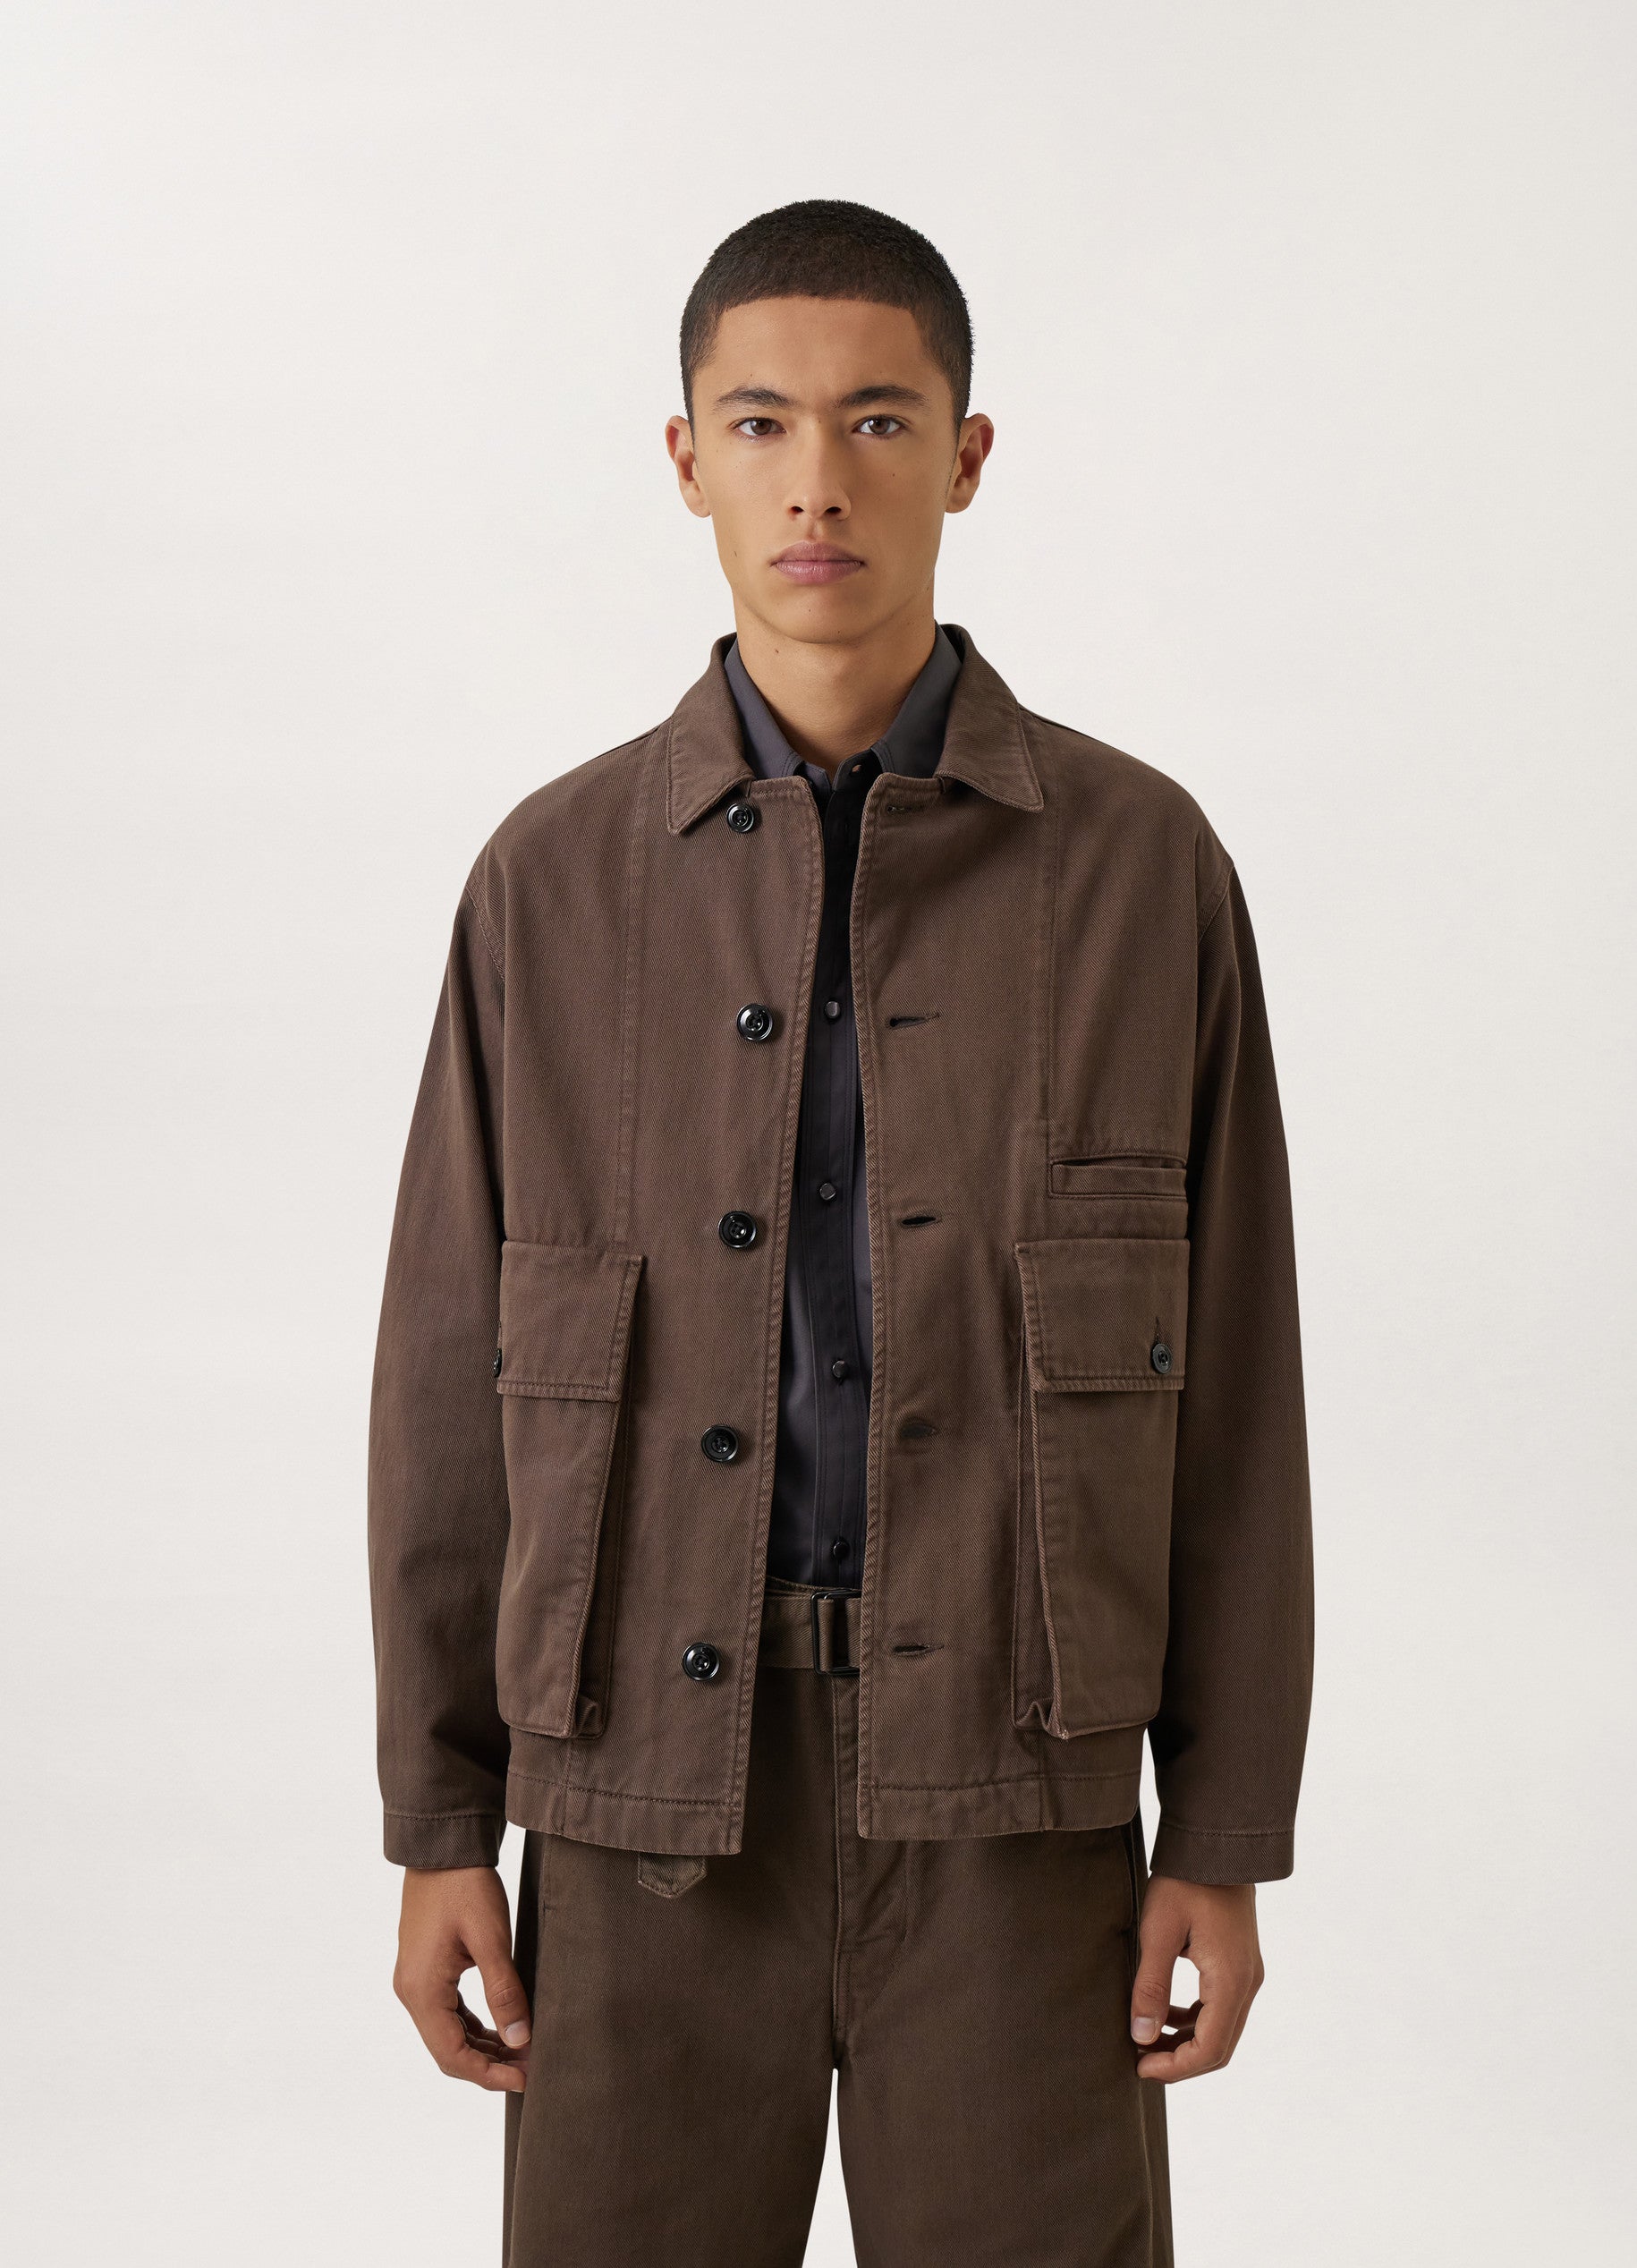 Boxy Jacket - Dark Brown | LEMAIRE - Lemaire-USA